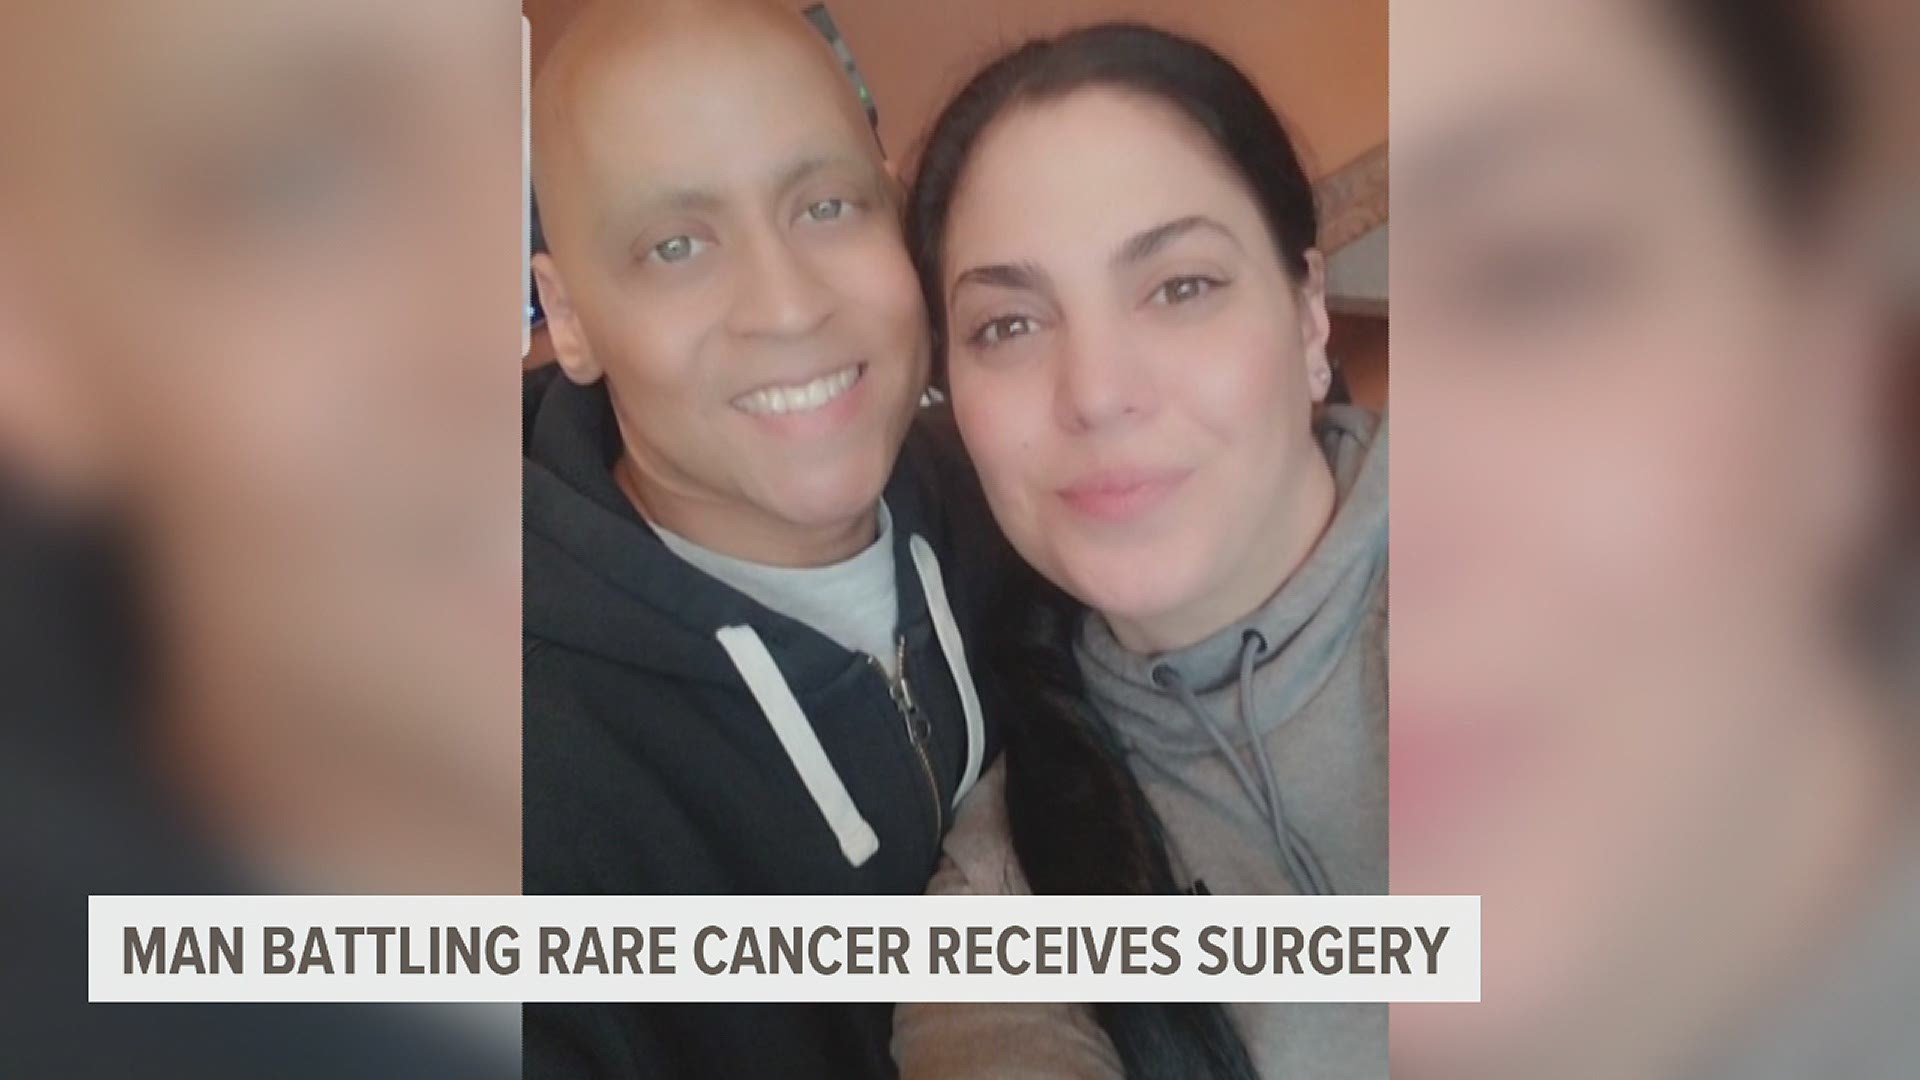 “He was in fact able to get all the cancer,” said Omar's fiancé Jacqueline Karimi.